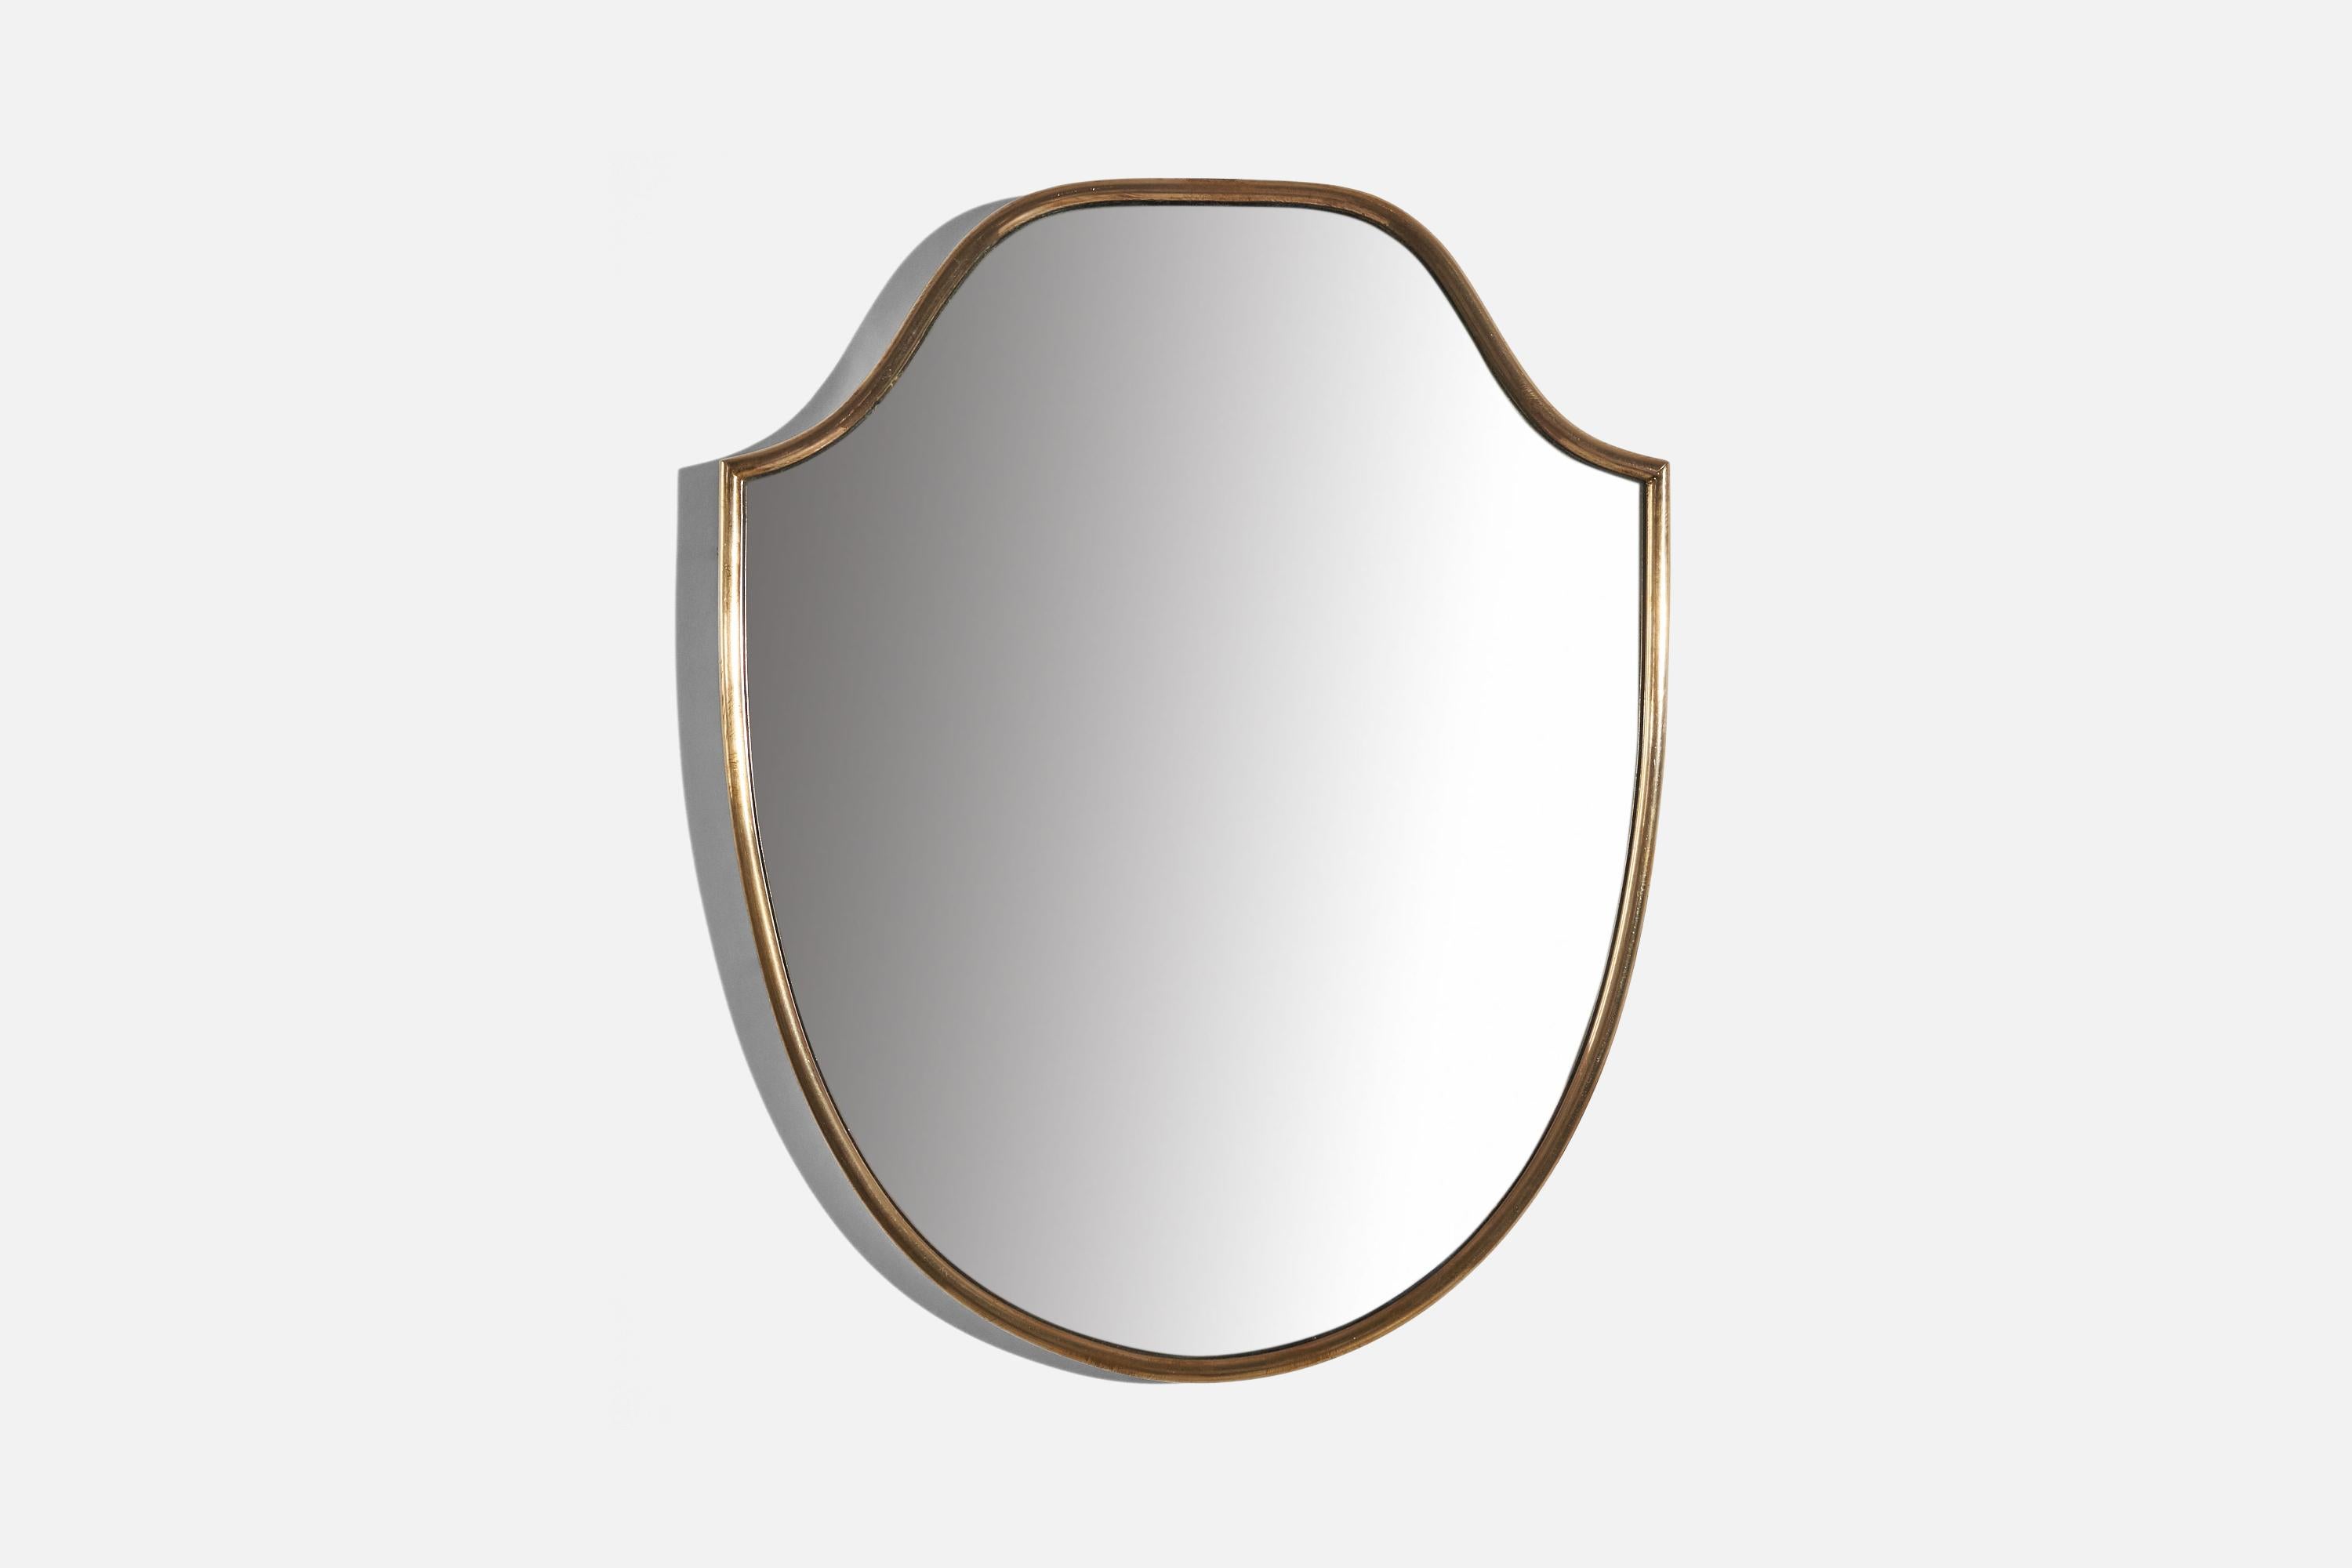 A brass wall mirror designed and produced in Italy, c. 1950s.
   